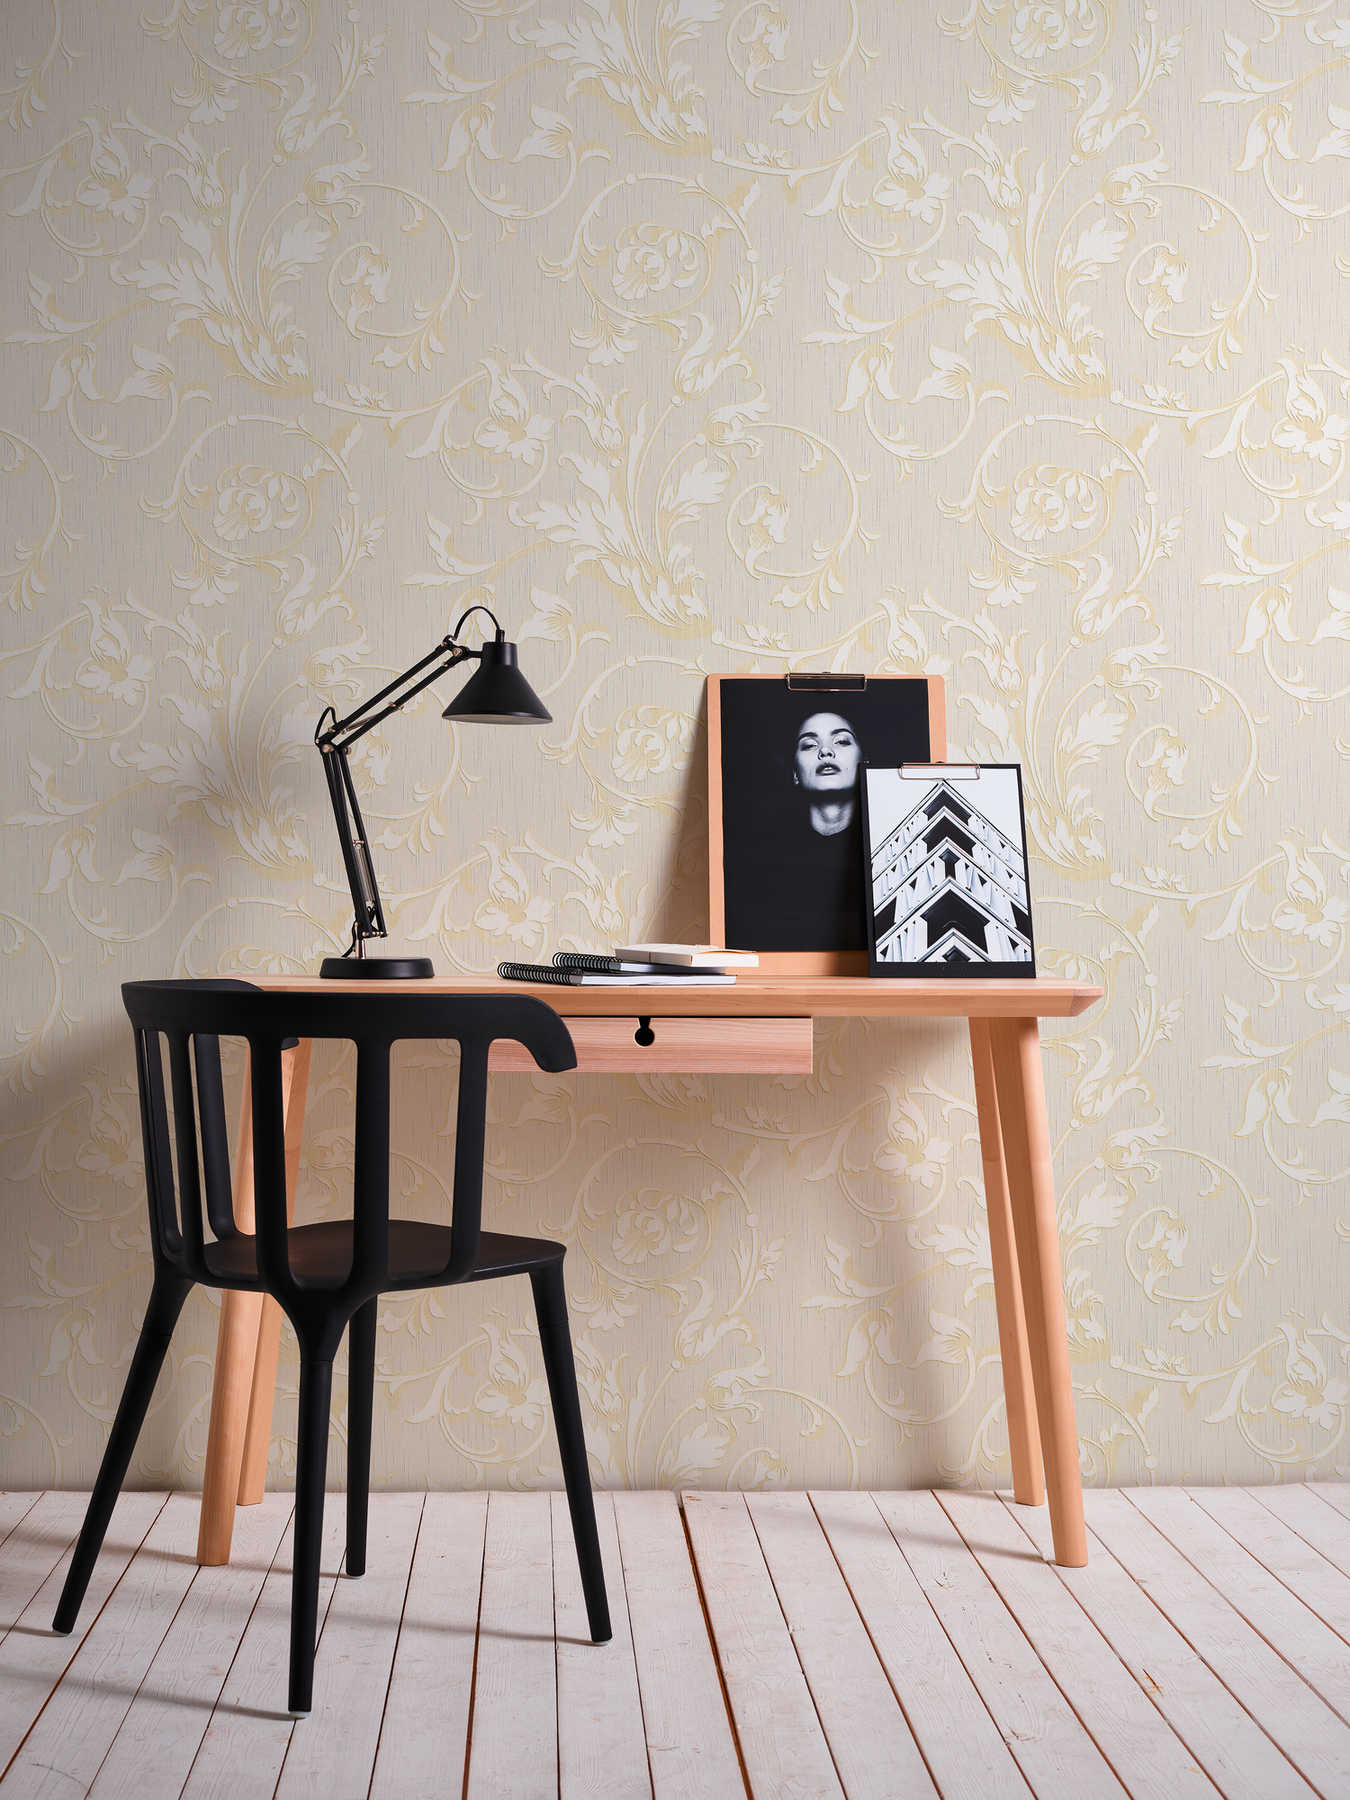             Hermitage wallpaper with floral ornament - beige, cream
        